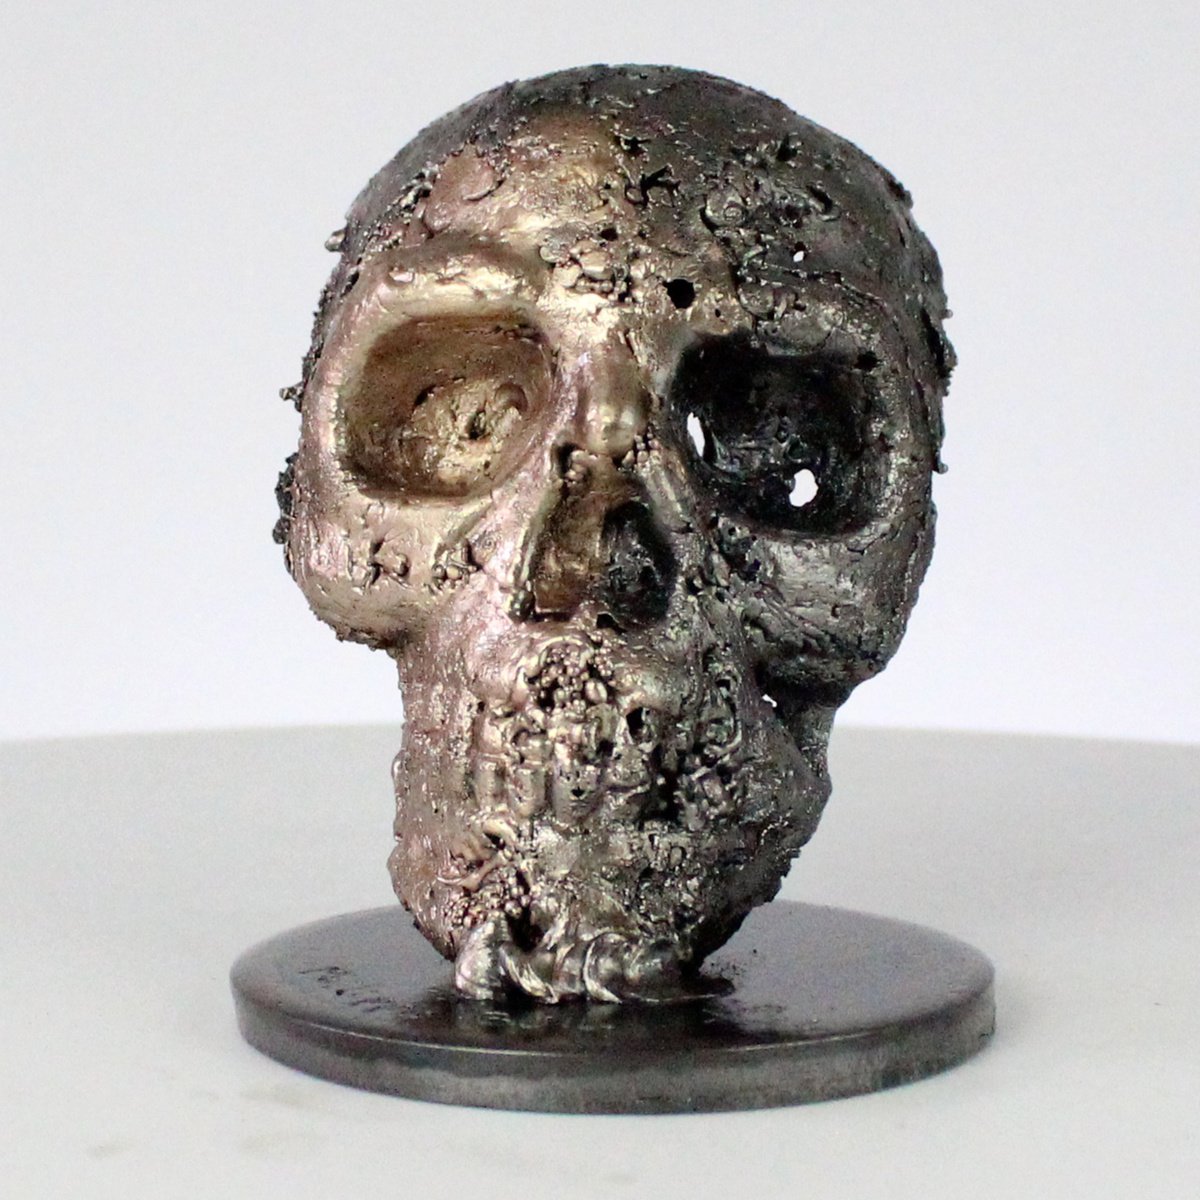 Skull 101-21 by Philippe Buil